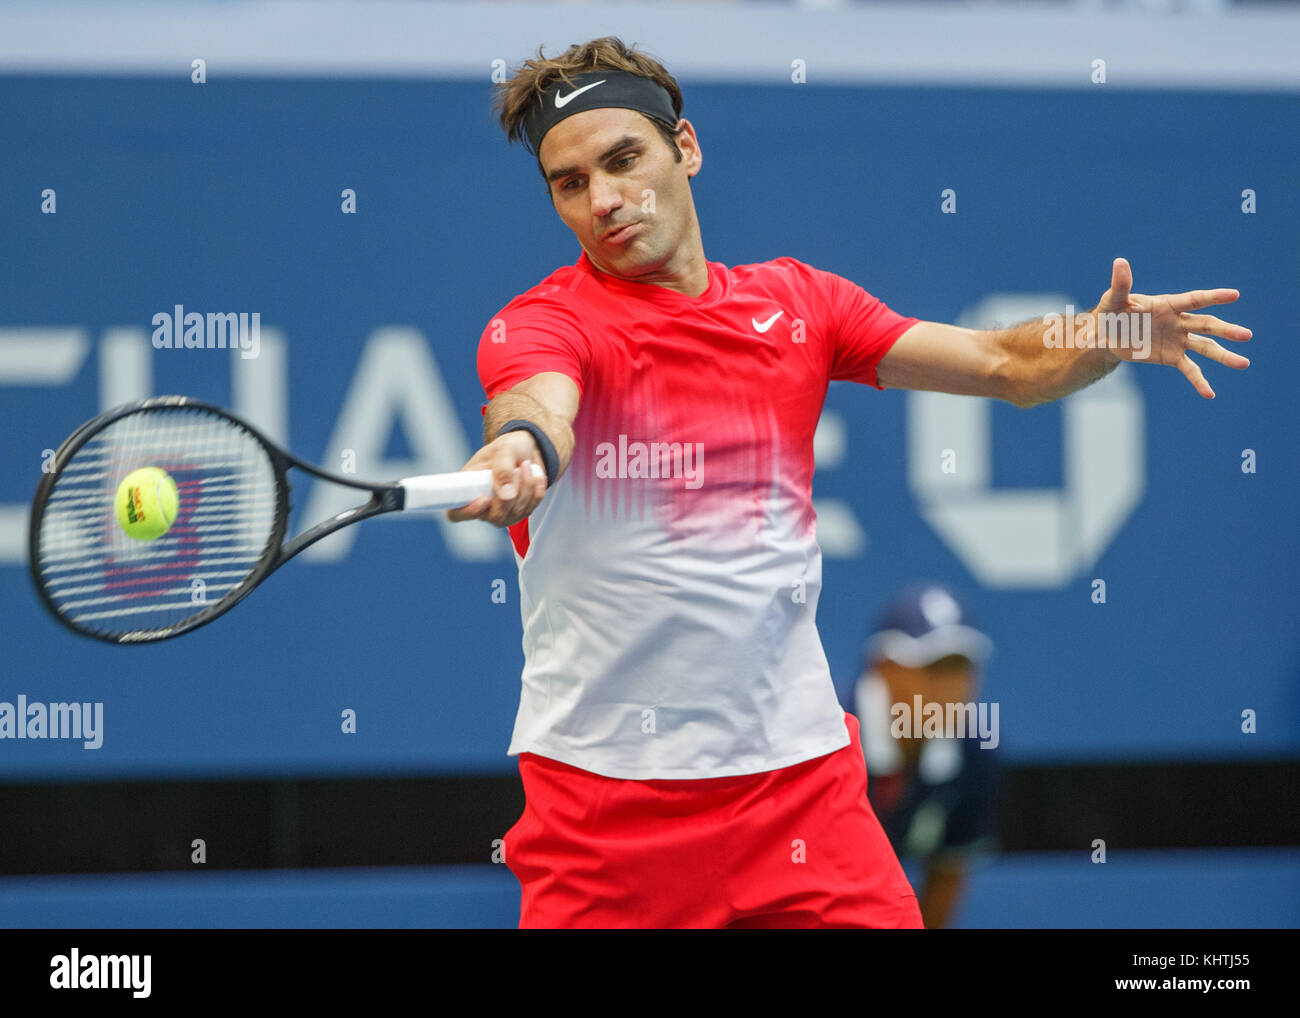 Swiss tennis player ROGER FEDERER (SUI) plays forehand shot during men's singles match at US Open 2017 Tennis Championship, New York City, New York St Stock Photo